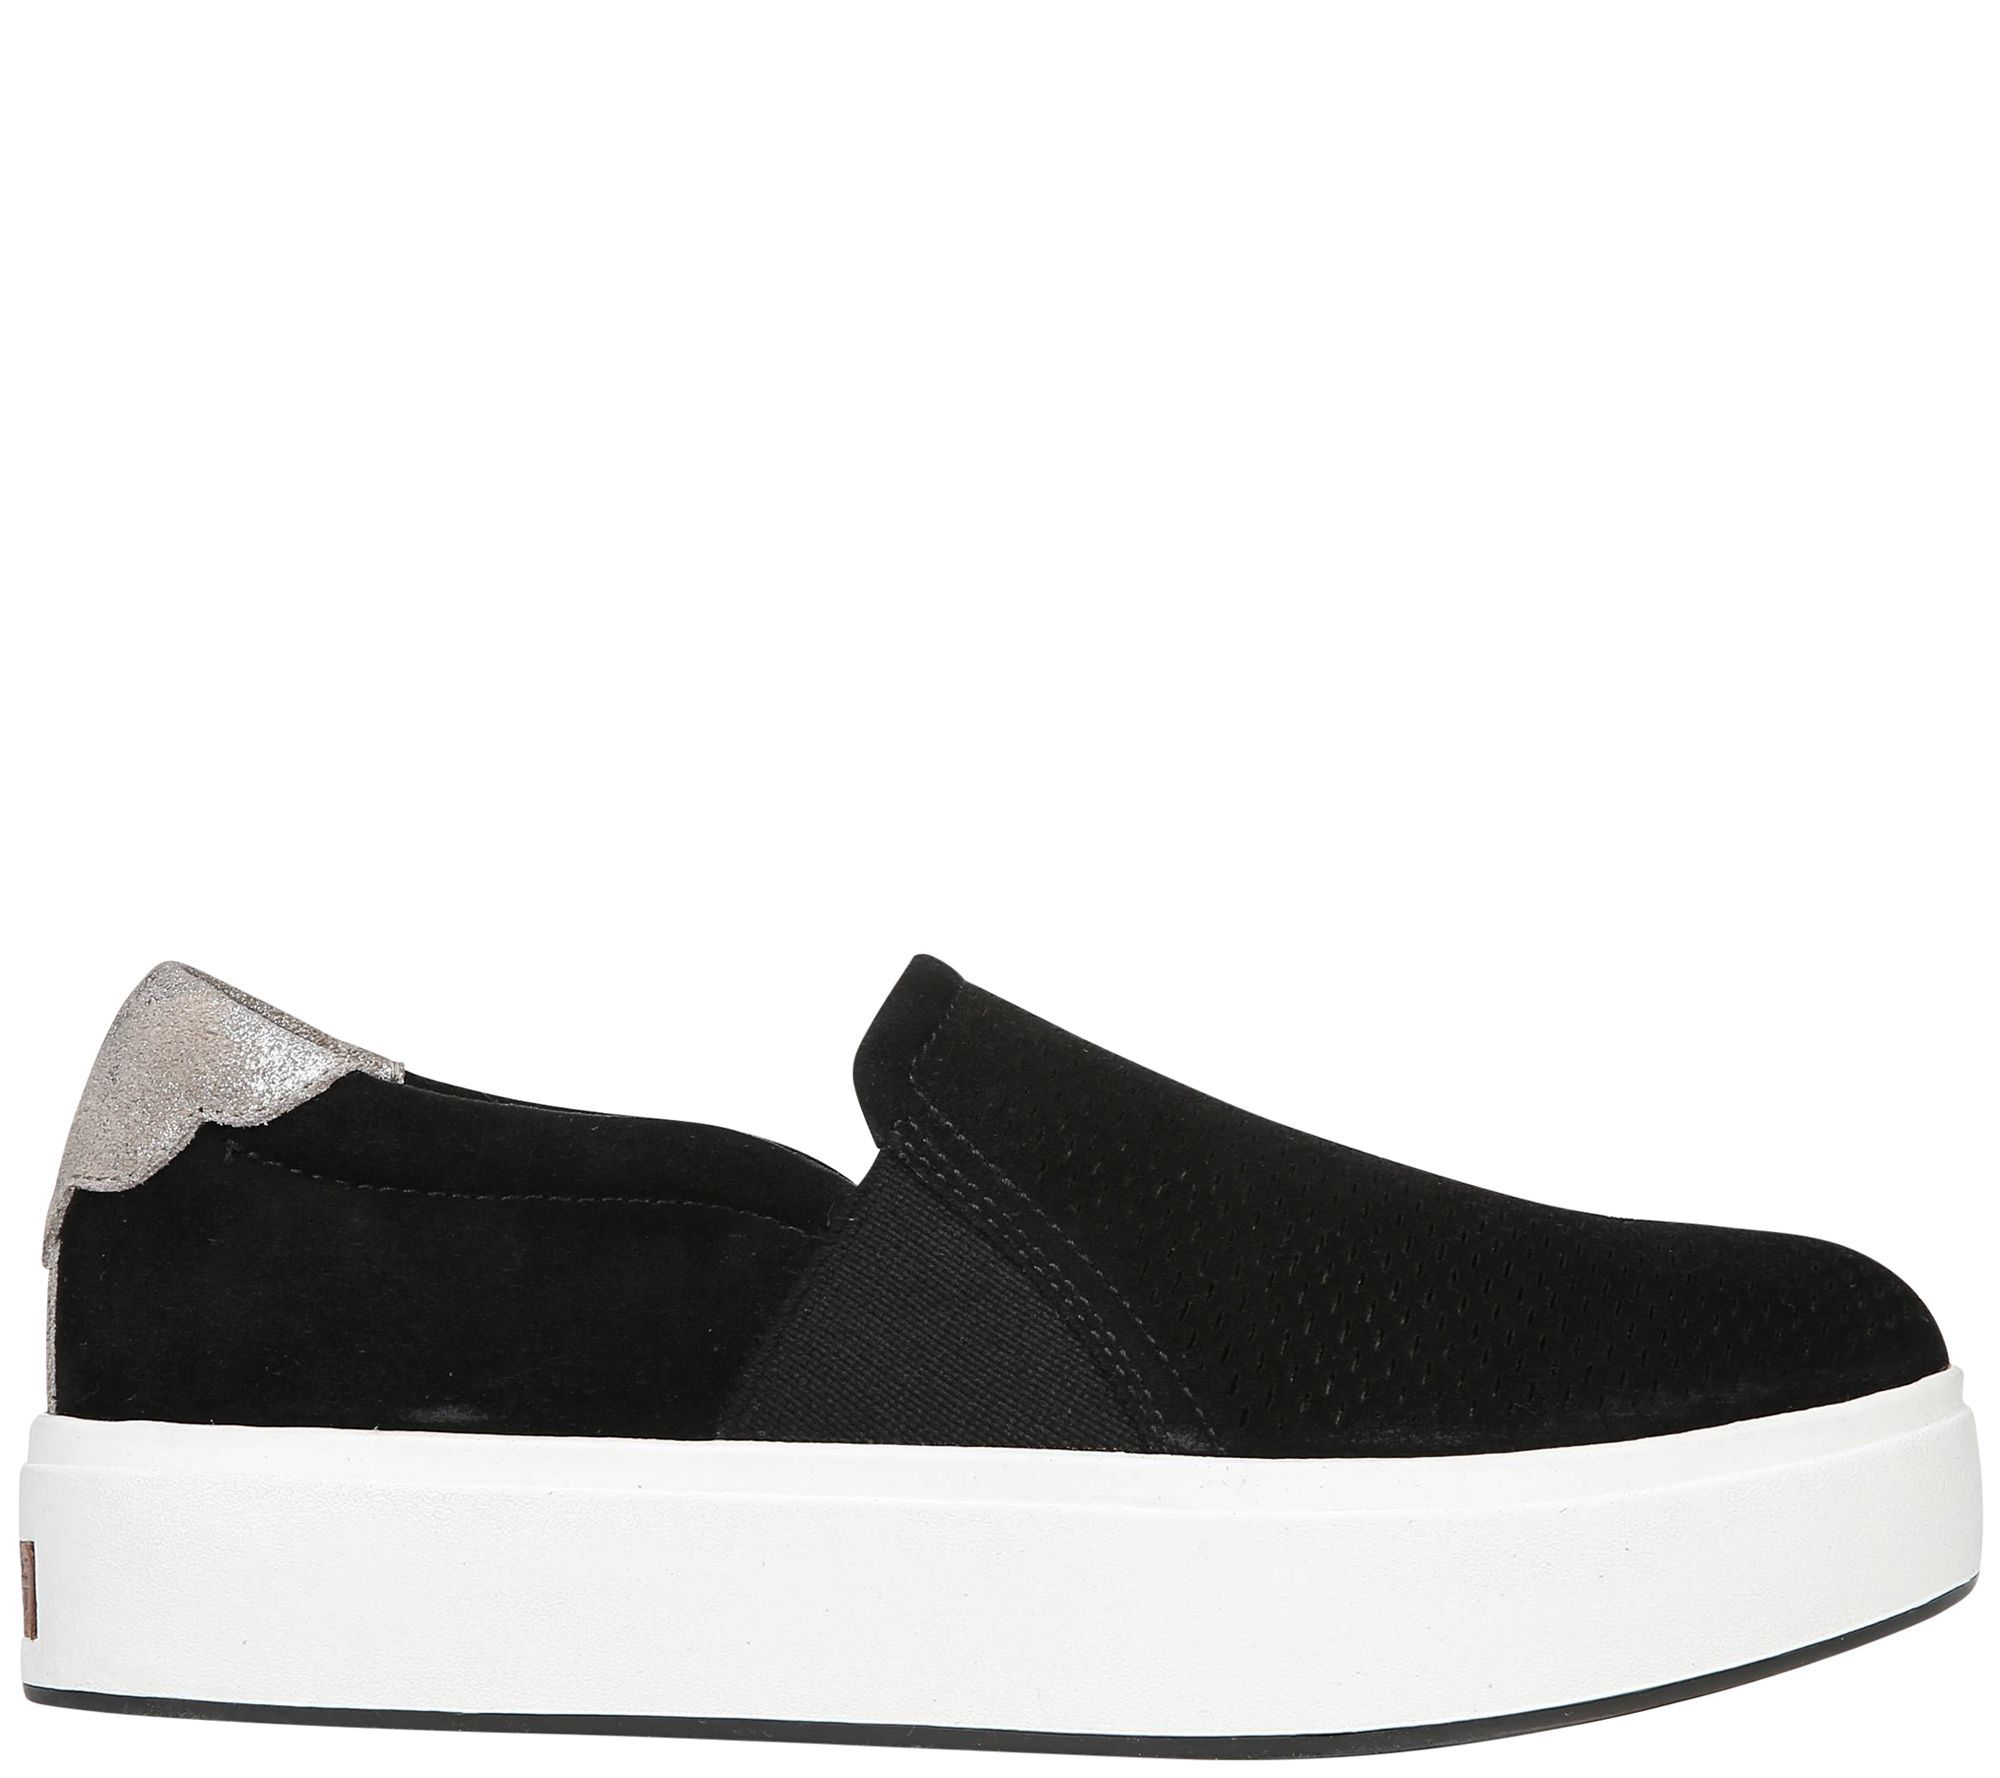 Dr. Scholl's Sporty Suede Slip-On Sneakers - Abbot Lux - QVC.com